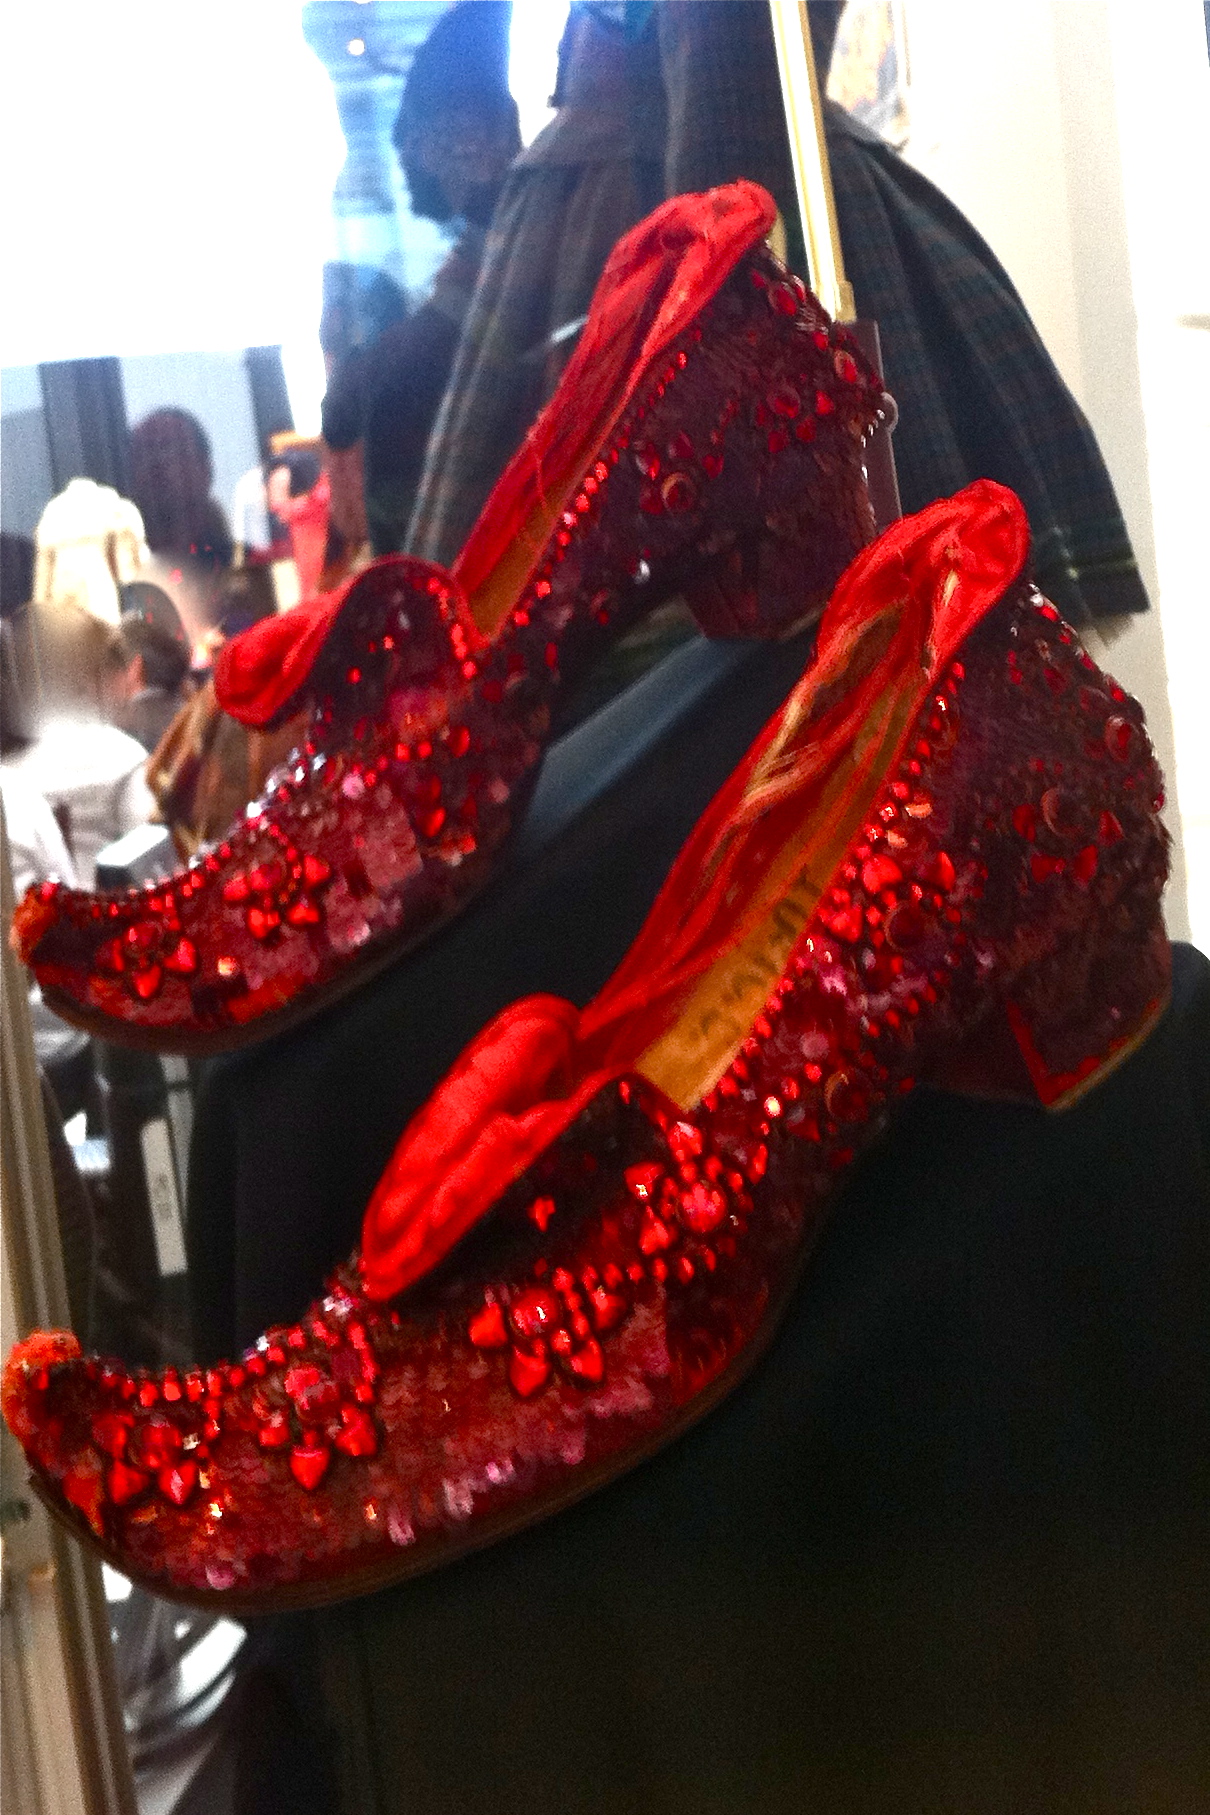 The Wizard of Oz' Ruby Slippers Found After Being Stolen